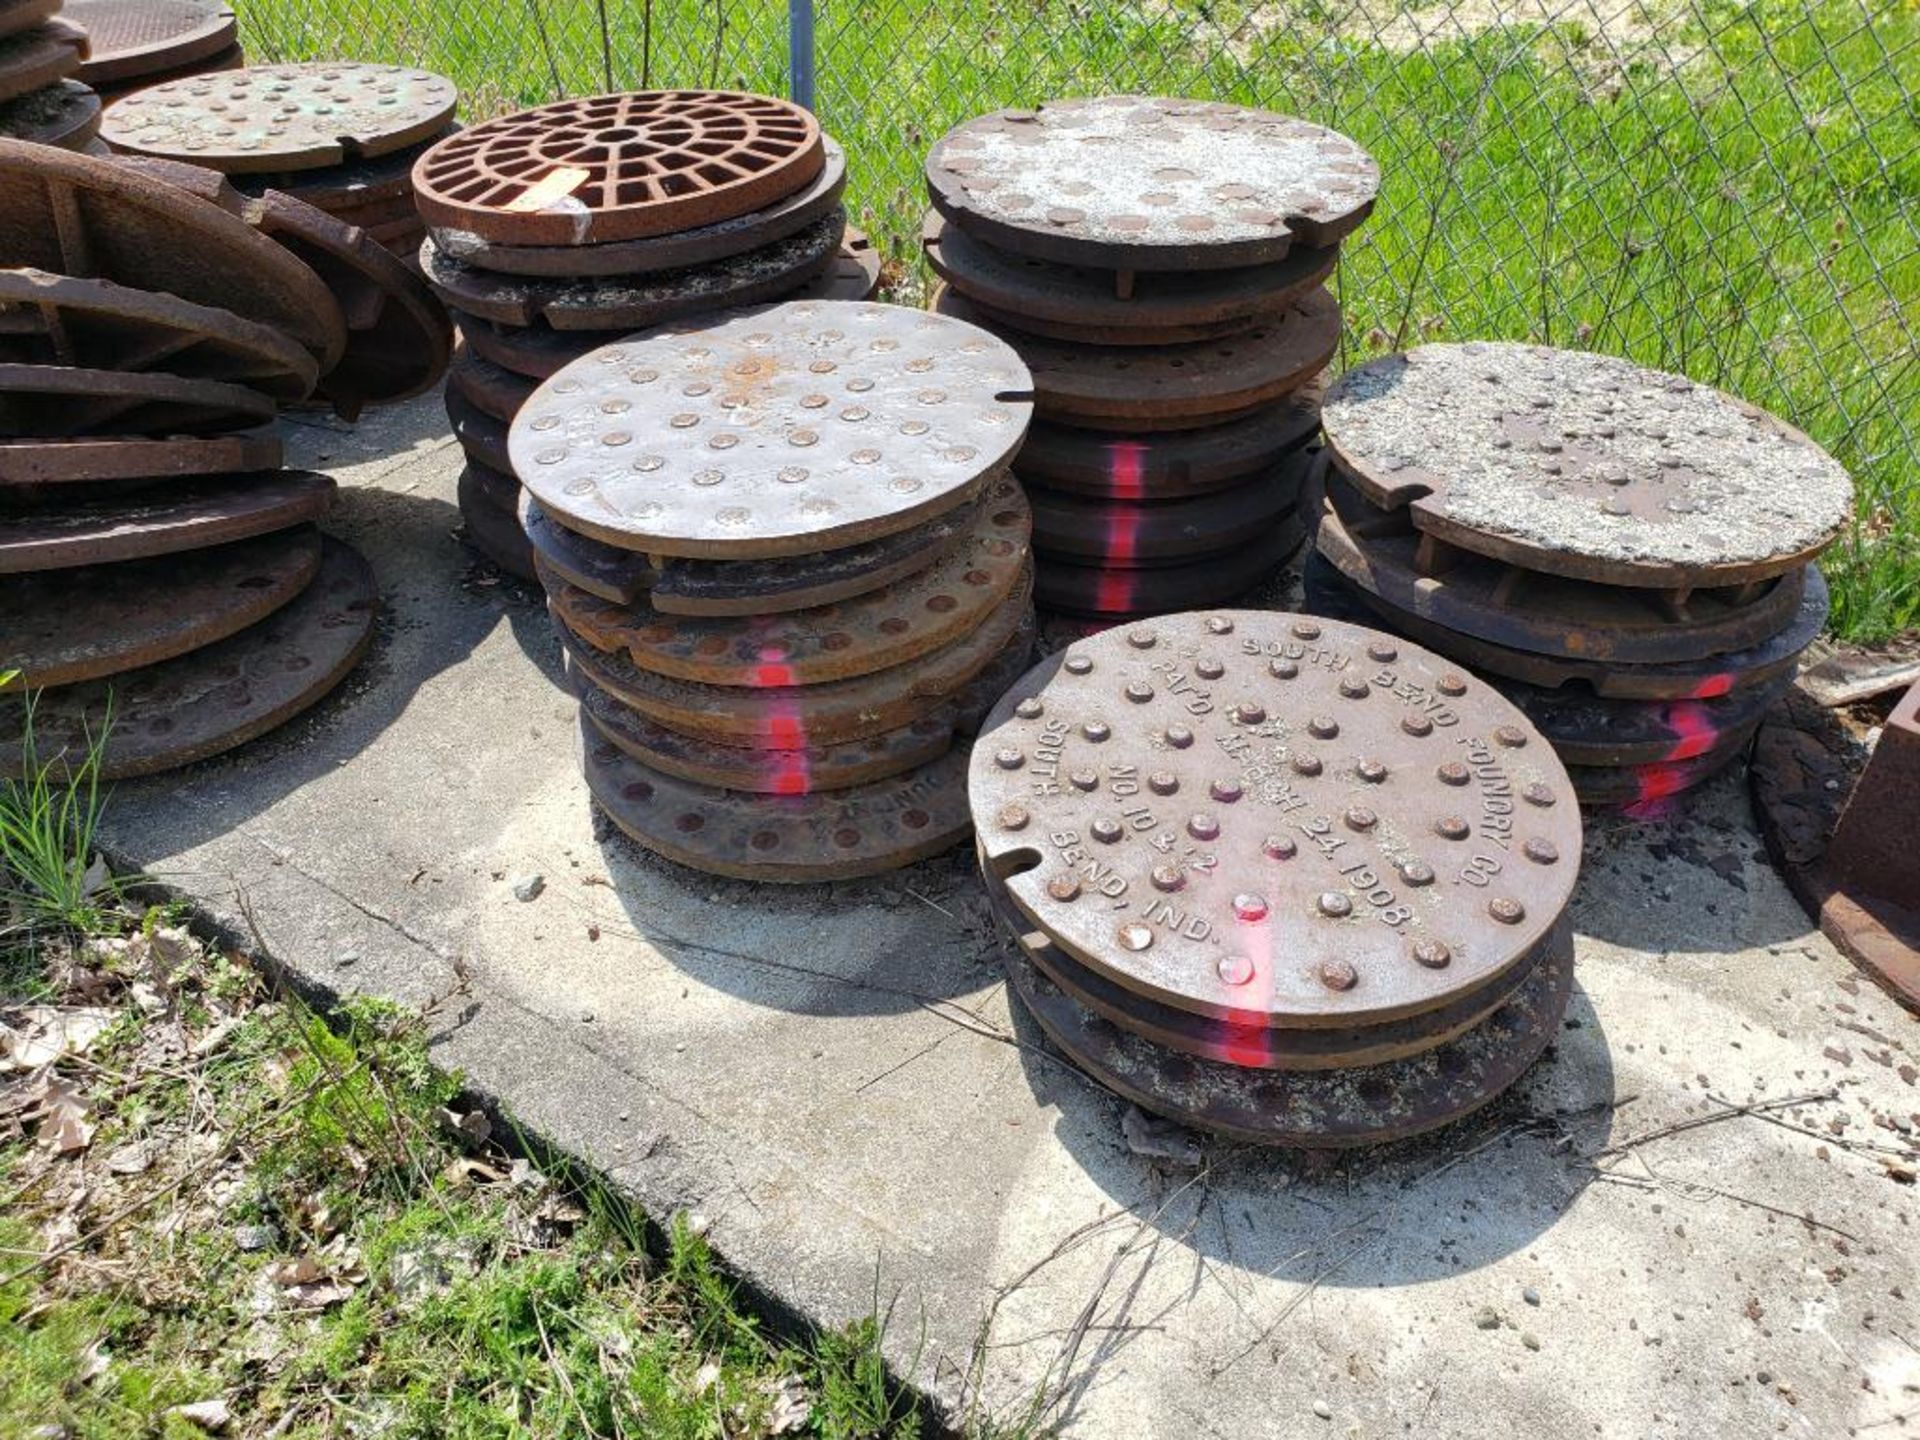 Assorted man hole covers. (units with pink marking are NOT included in lot) - Image 8 of 8